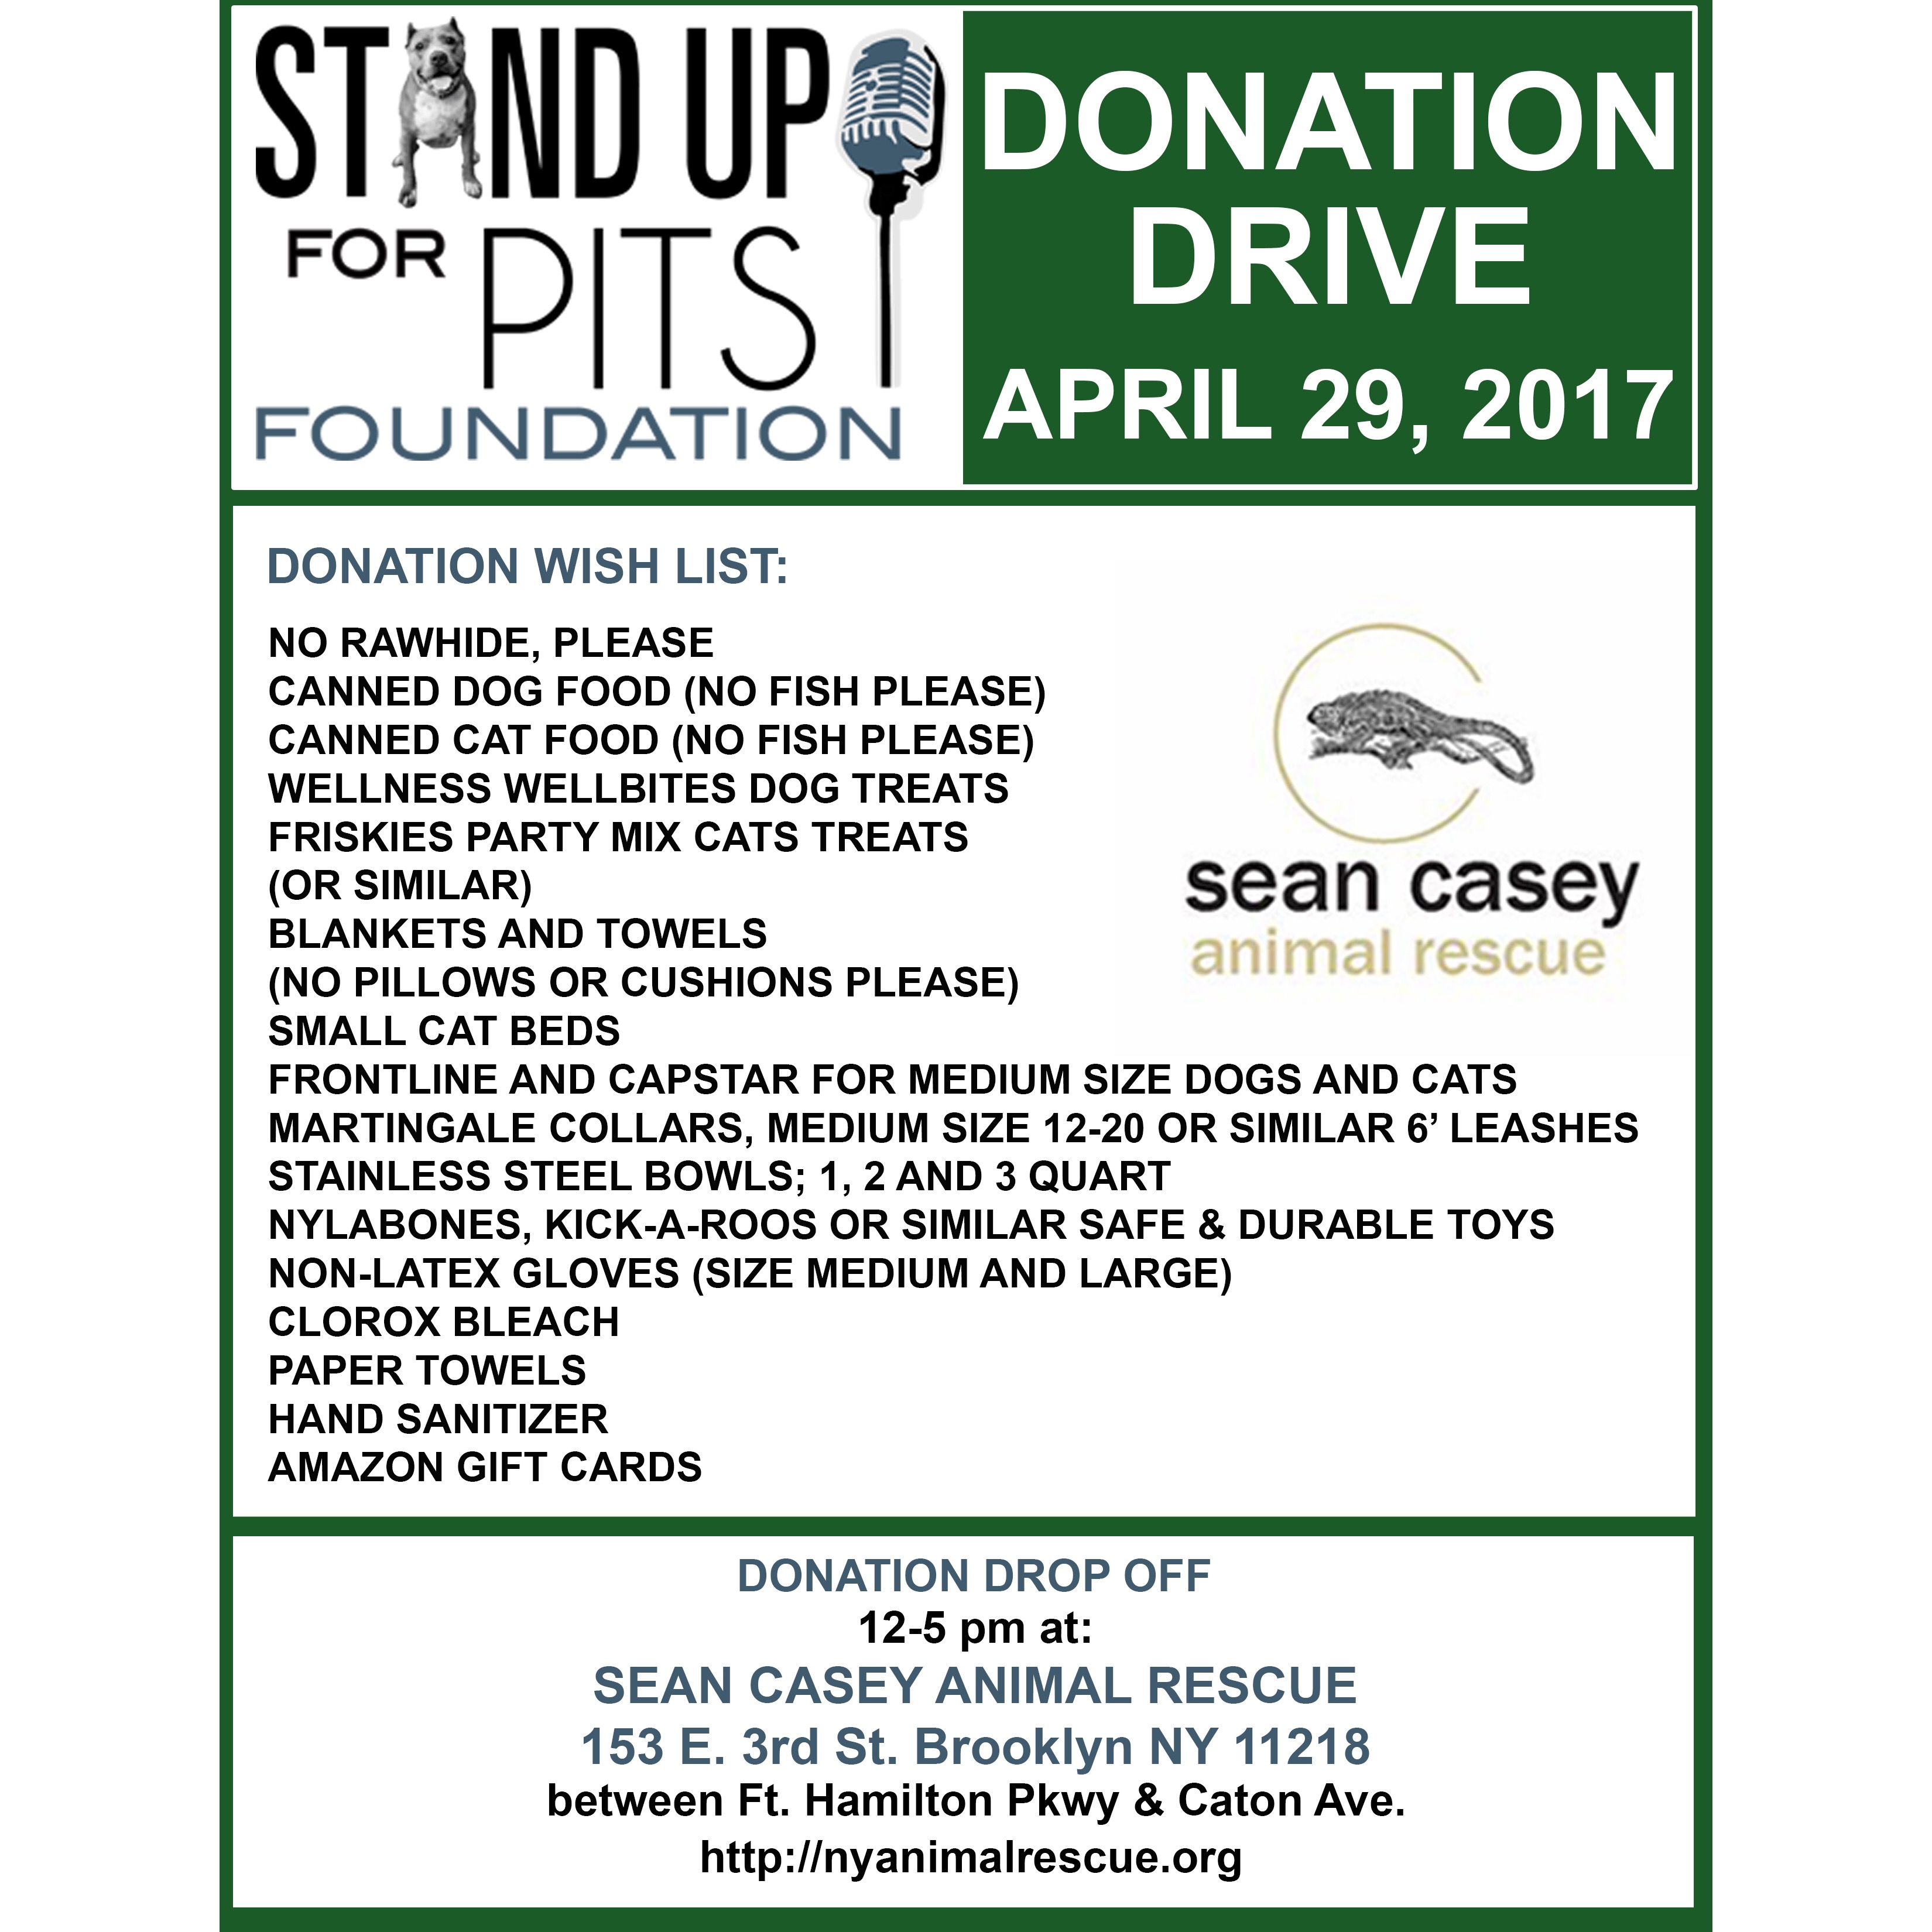 New York SUFP Donation Drive is April 29th!!